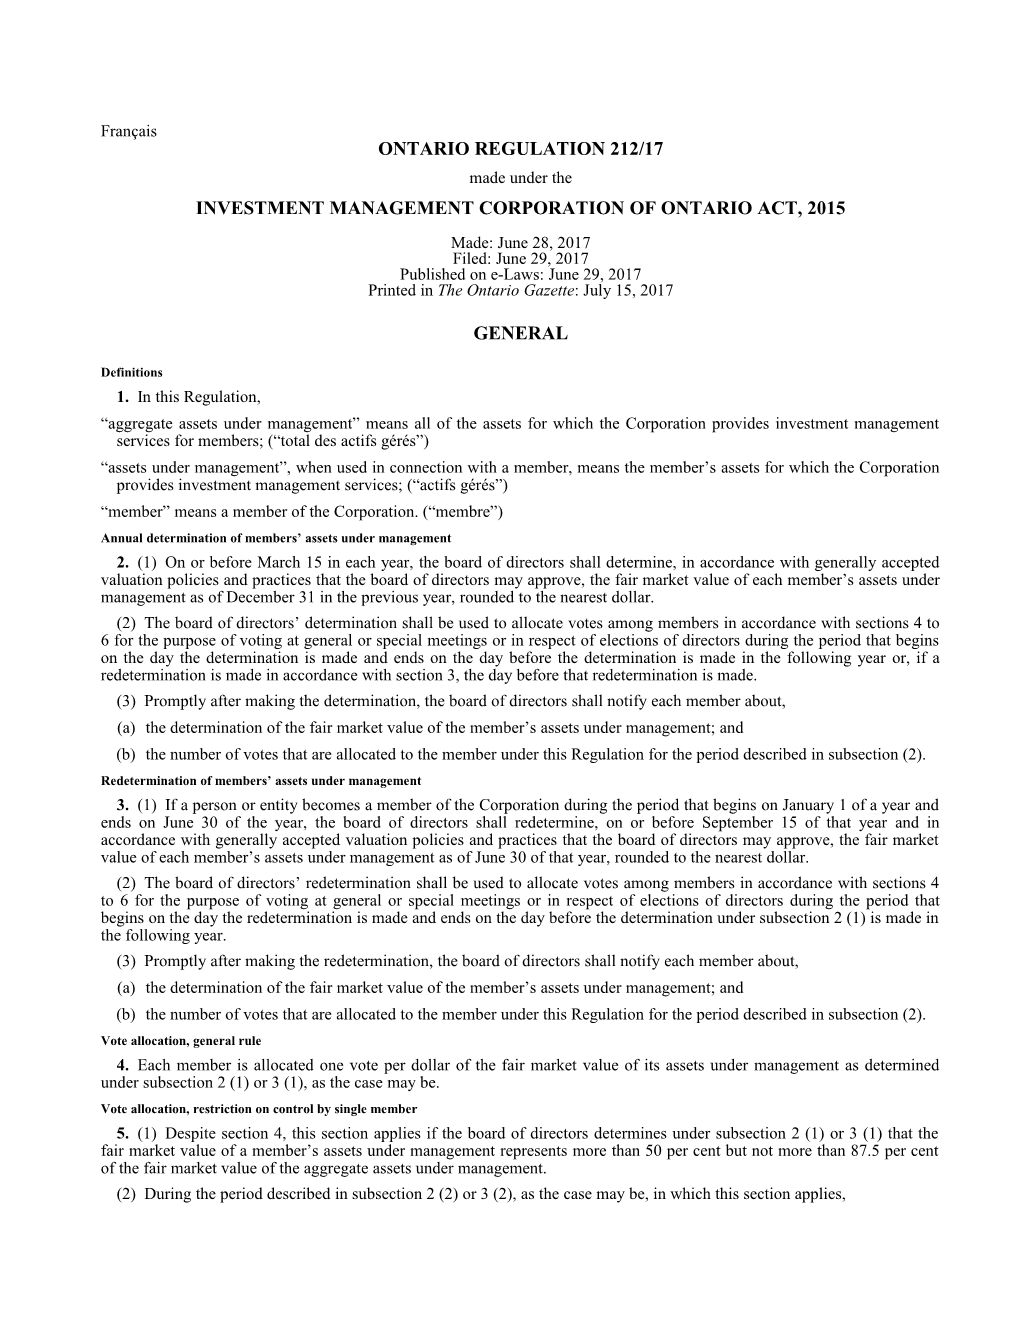 INVESTMENT MANAGEMENT CORPORATION of ONTARIO ACT, 2015 - O. Reg. 212/17